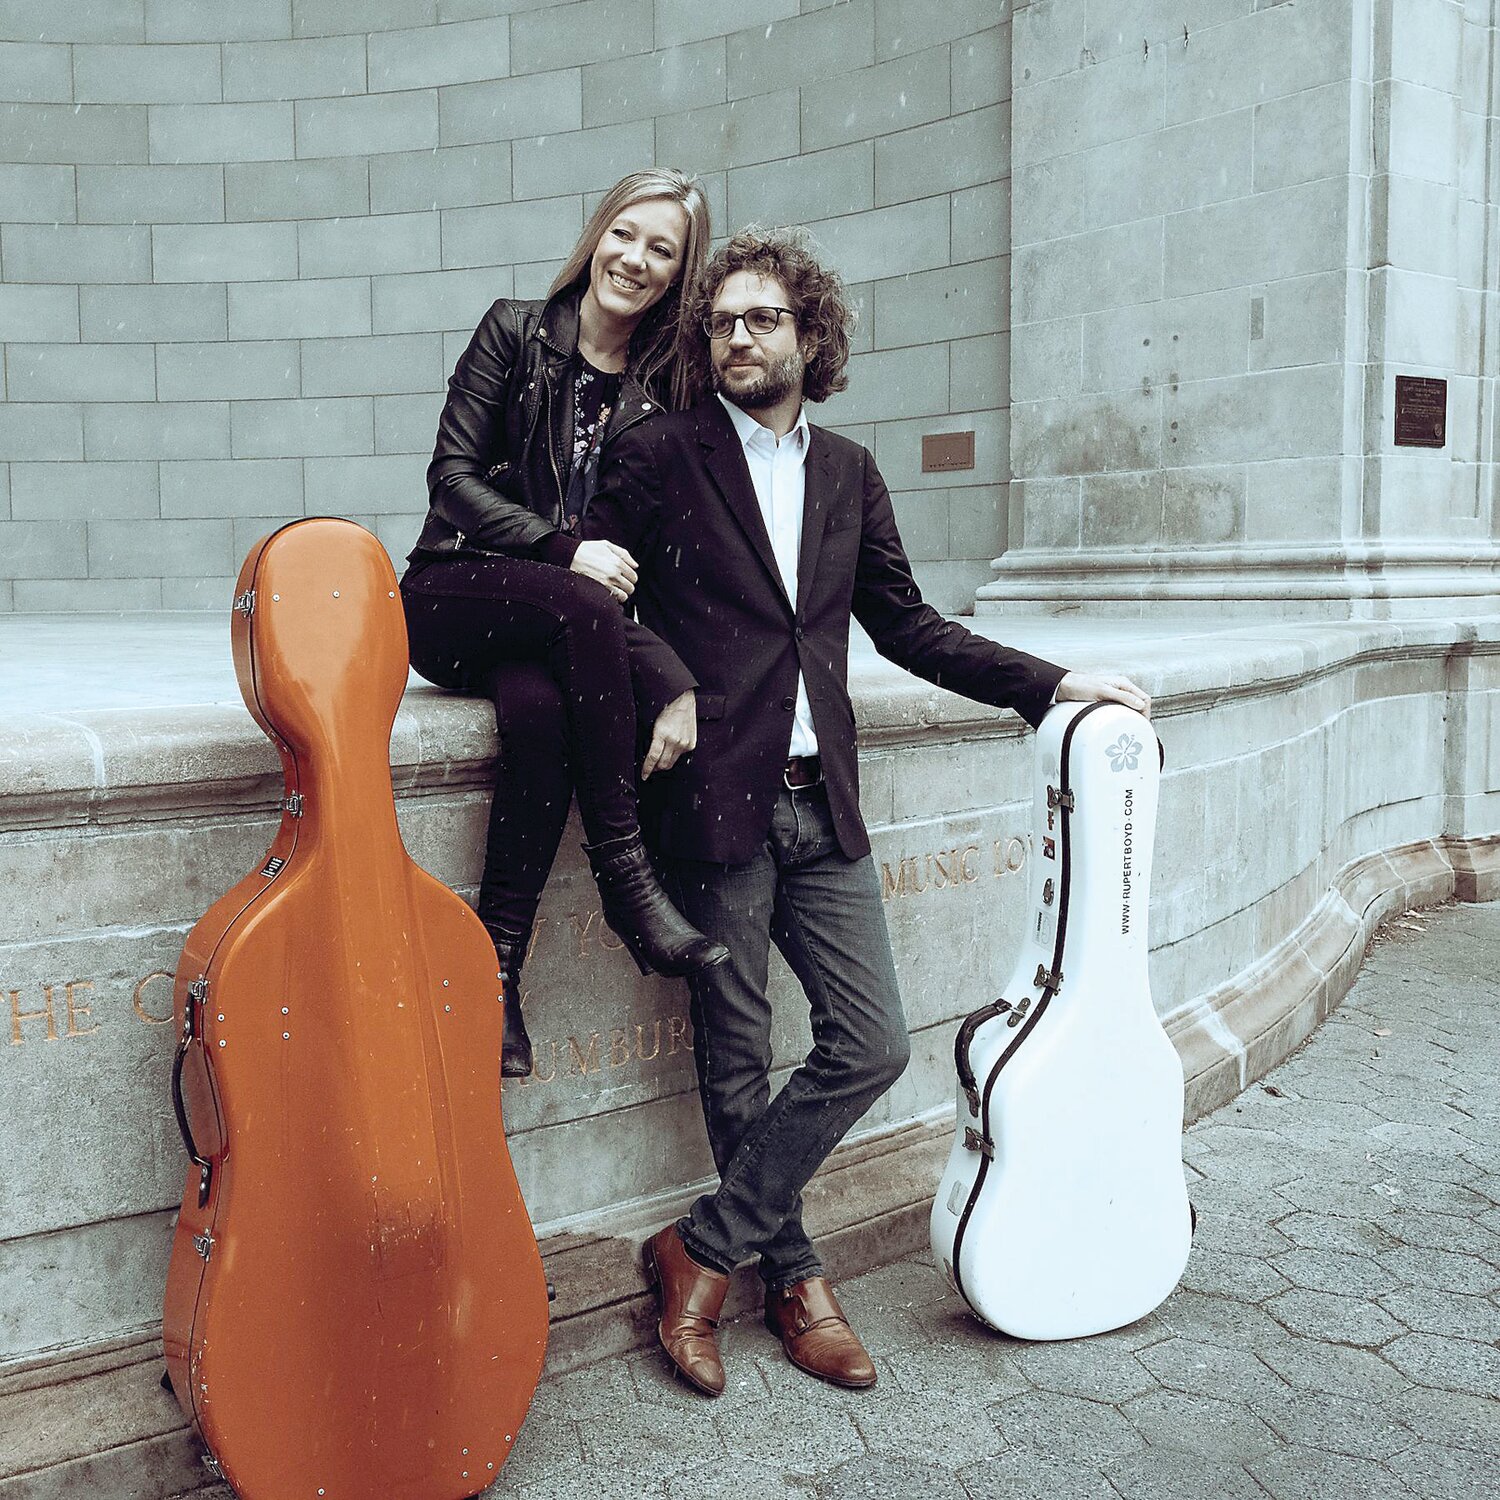 At 7 p.m. Thursday, June 15, “Boyd Meets Girl,” featuring guitarist Rupert Boyd and cellist Laura Metcalf, performs music by Bach, the Beatles, Beyoncé, Boccherini, and Radiohead against the backdrop of Trinity Church.